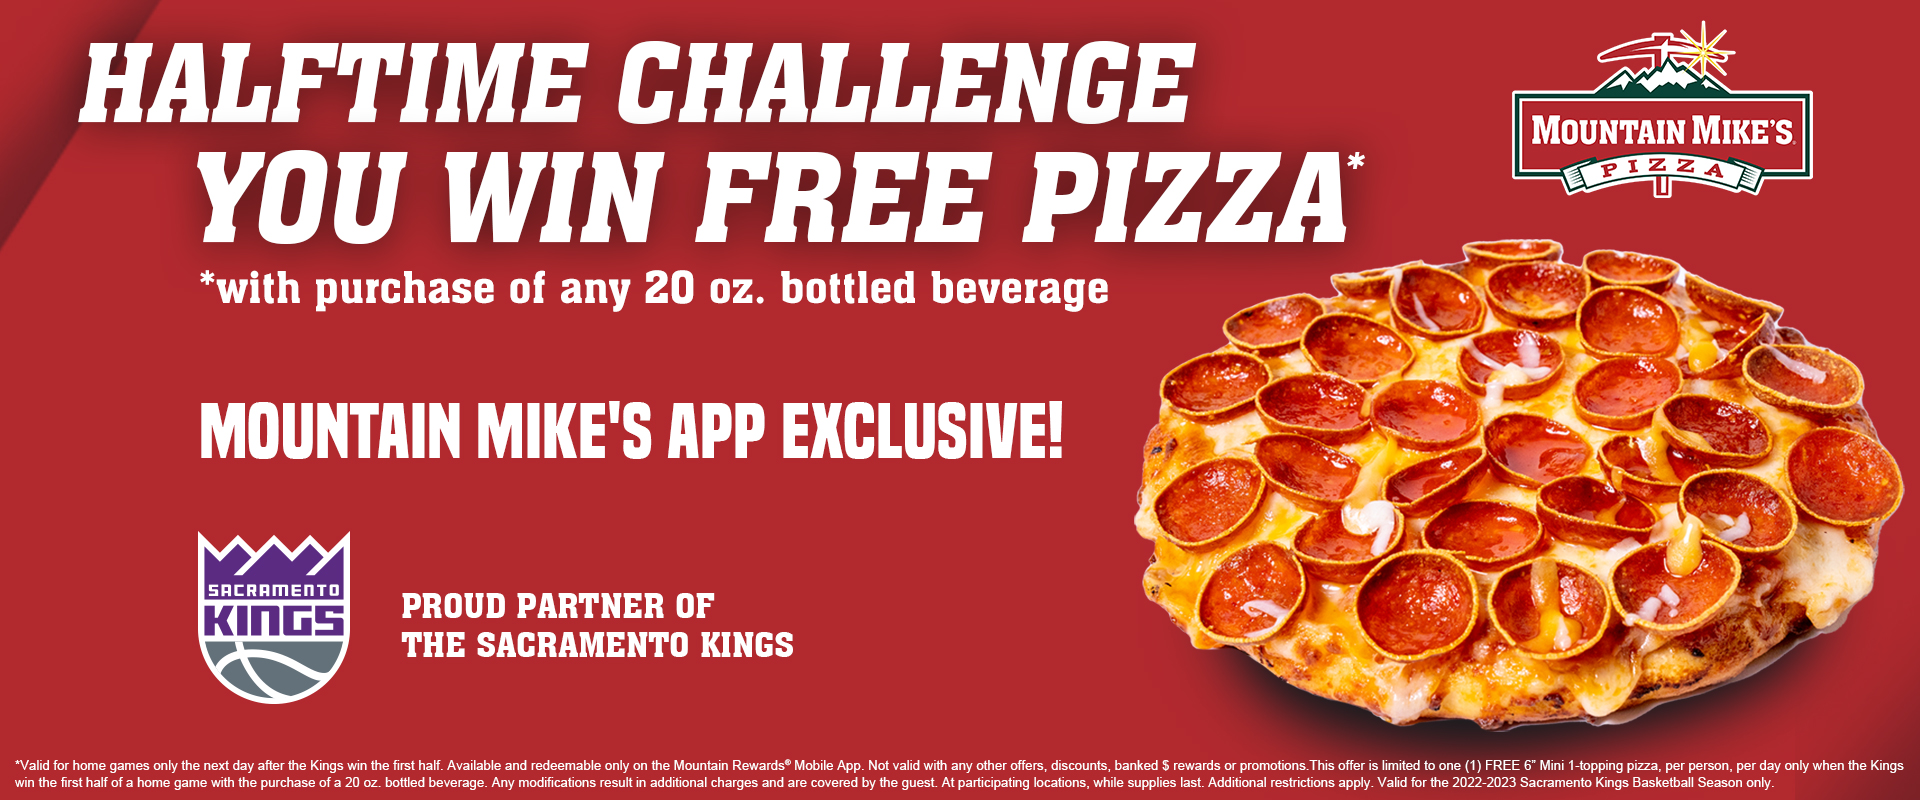 Halftime Challenge If The Kings are ahead at the end of the first half, then fans win a free mini 1-topping Pizza with purchase of any 20 oz. bottled beverage! Available and redeemable only in the Mountain Rewards app.